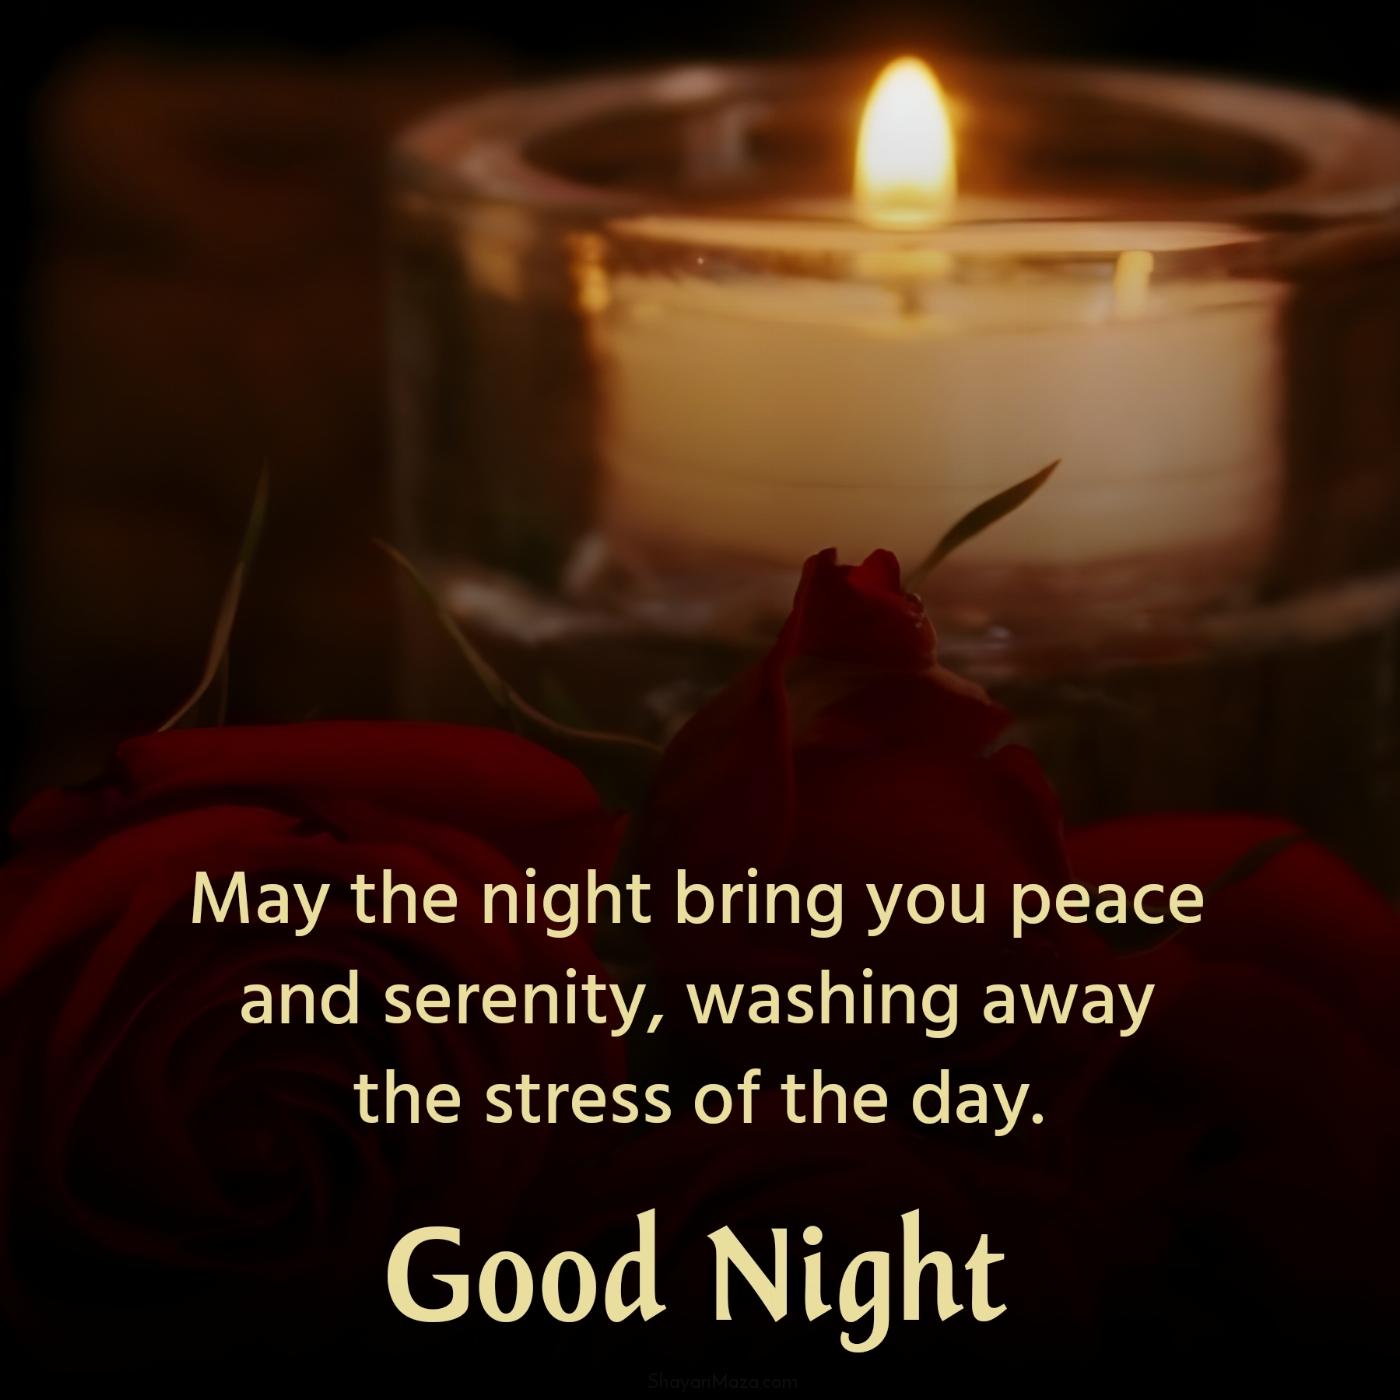 May the night bring you peace and serenity